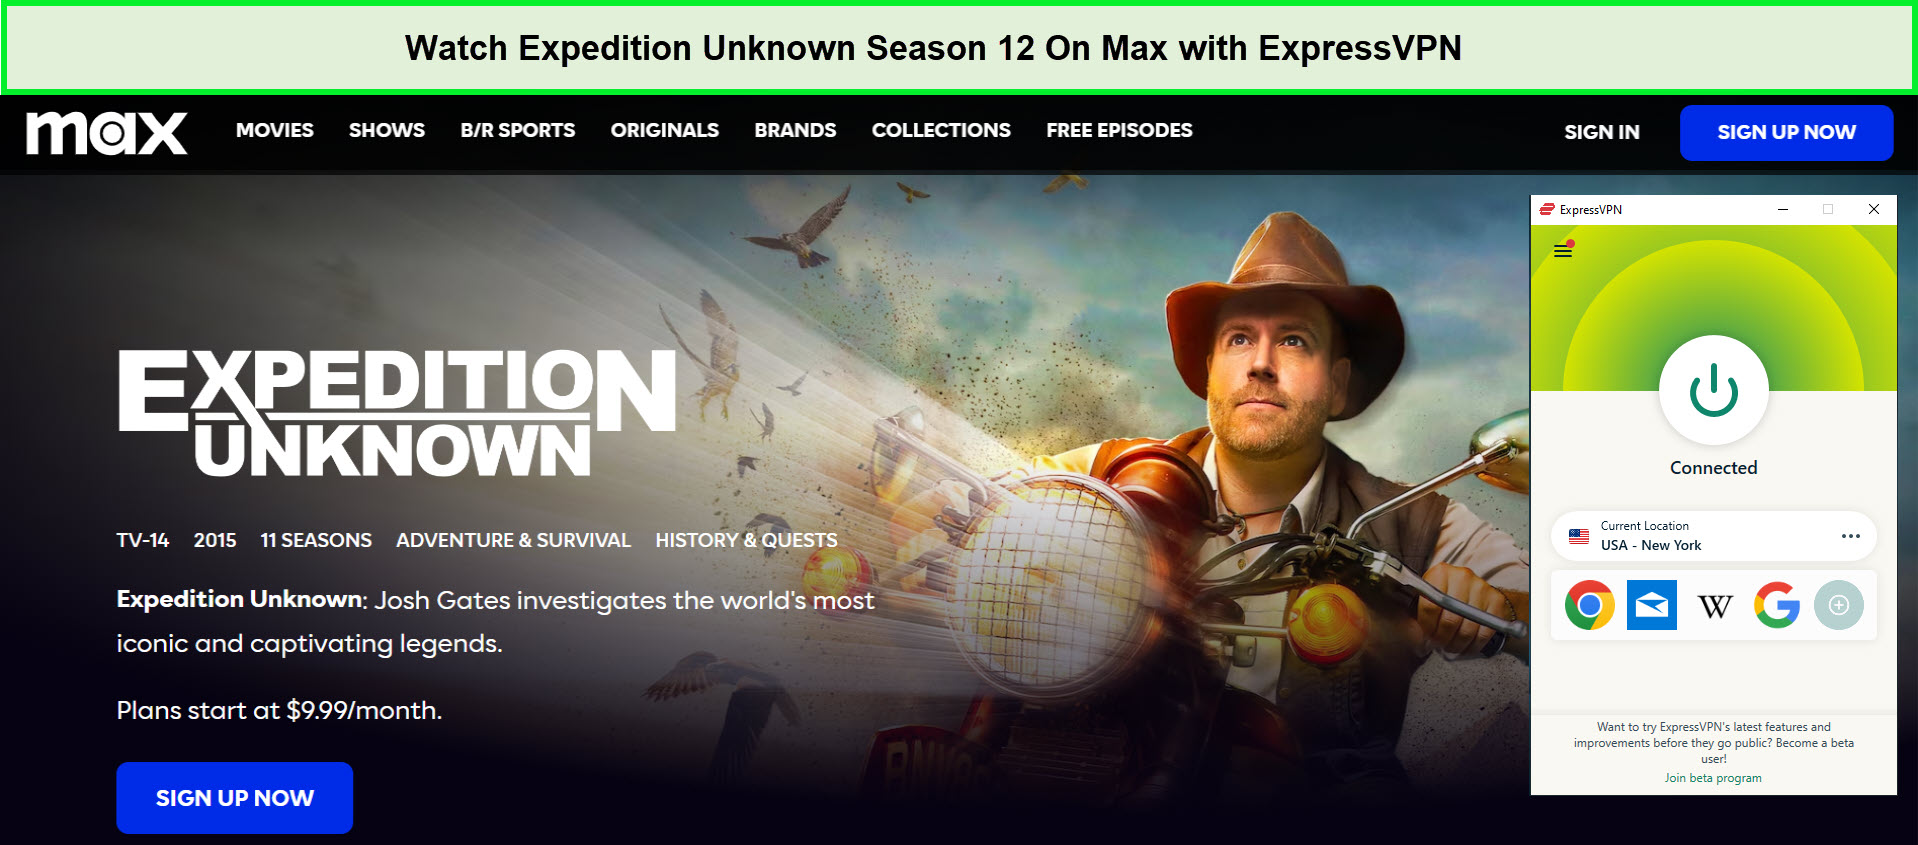 Watch-Expedition-Unknown-Season-12-in-Hong Kong-On-Max-with-ExpressVPN